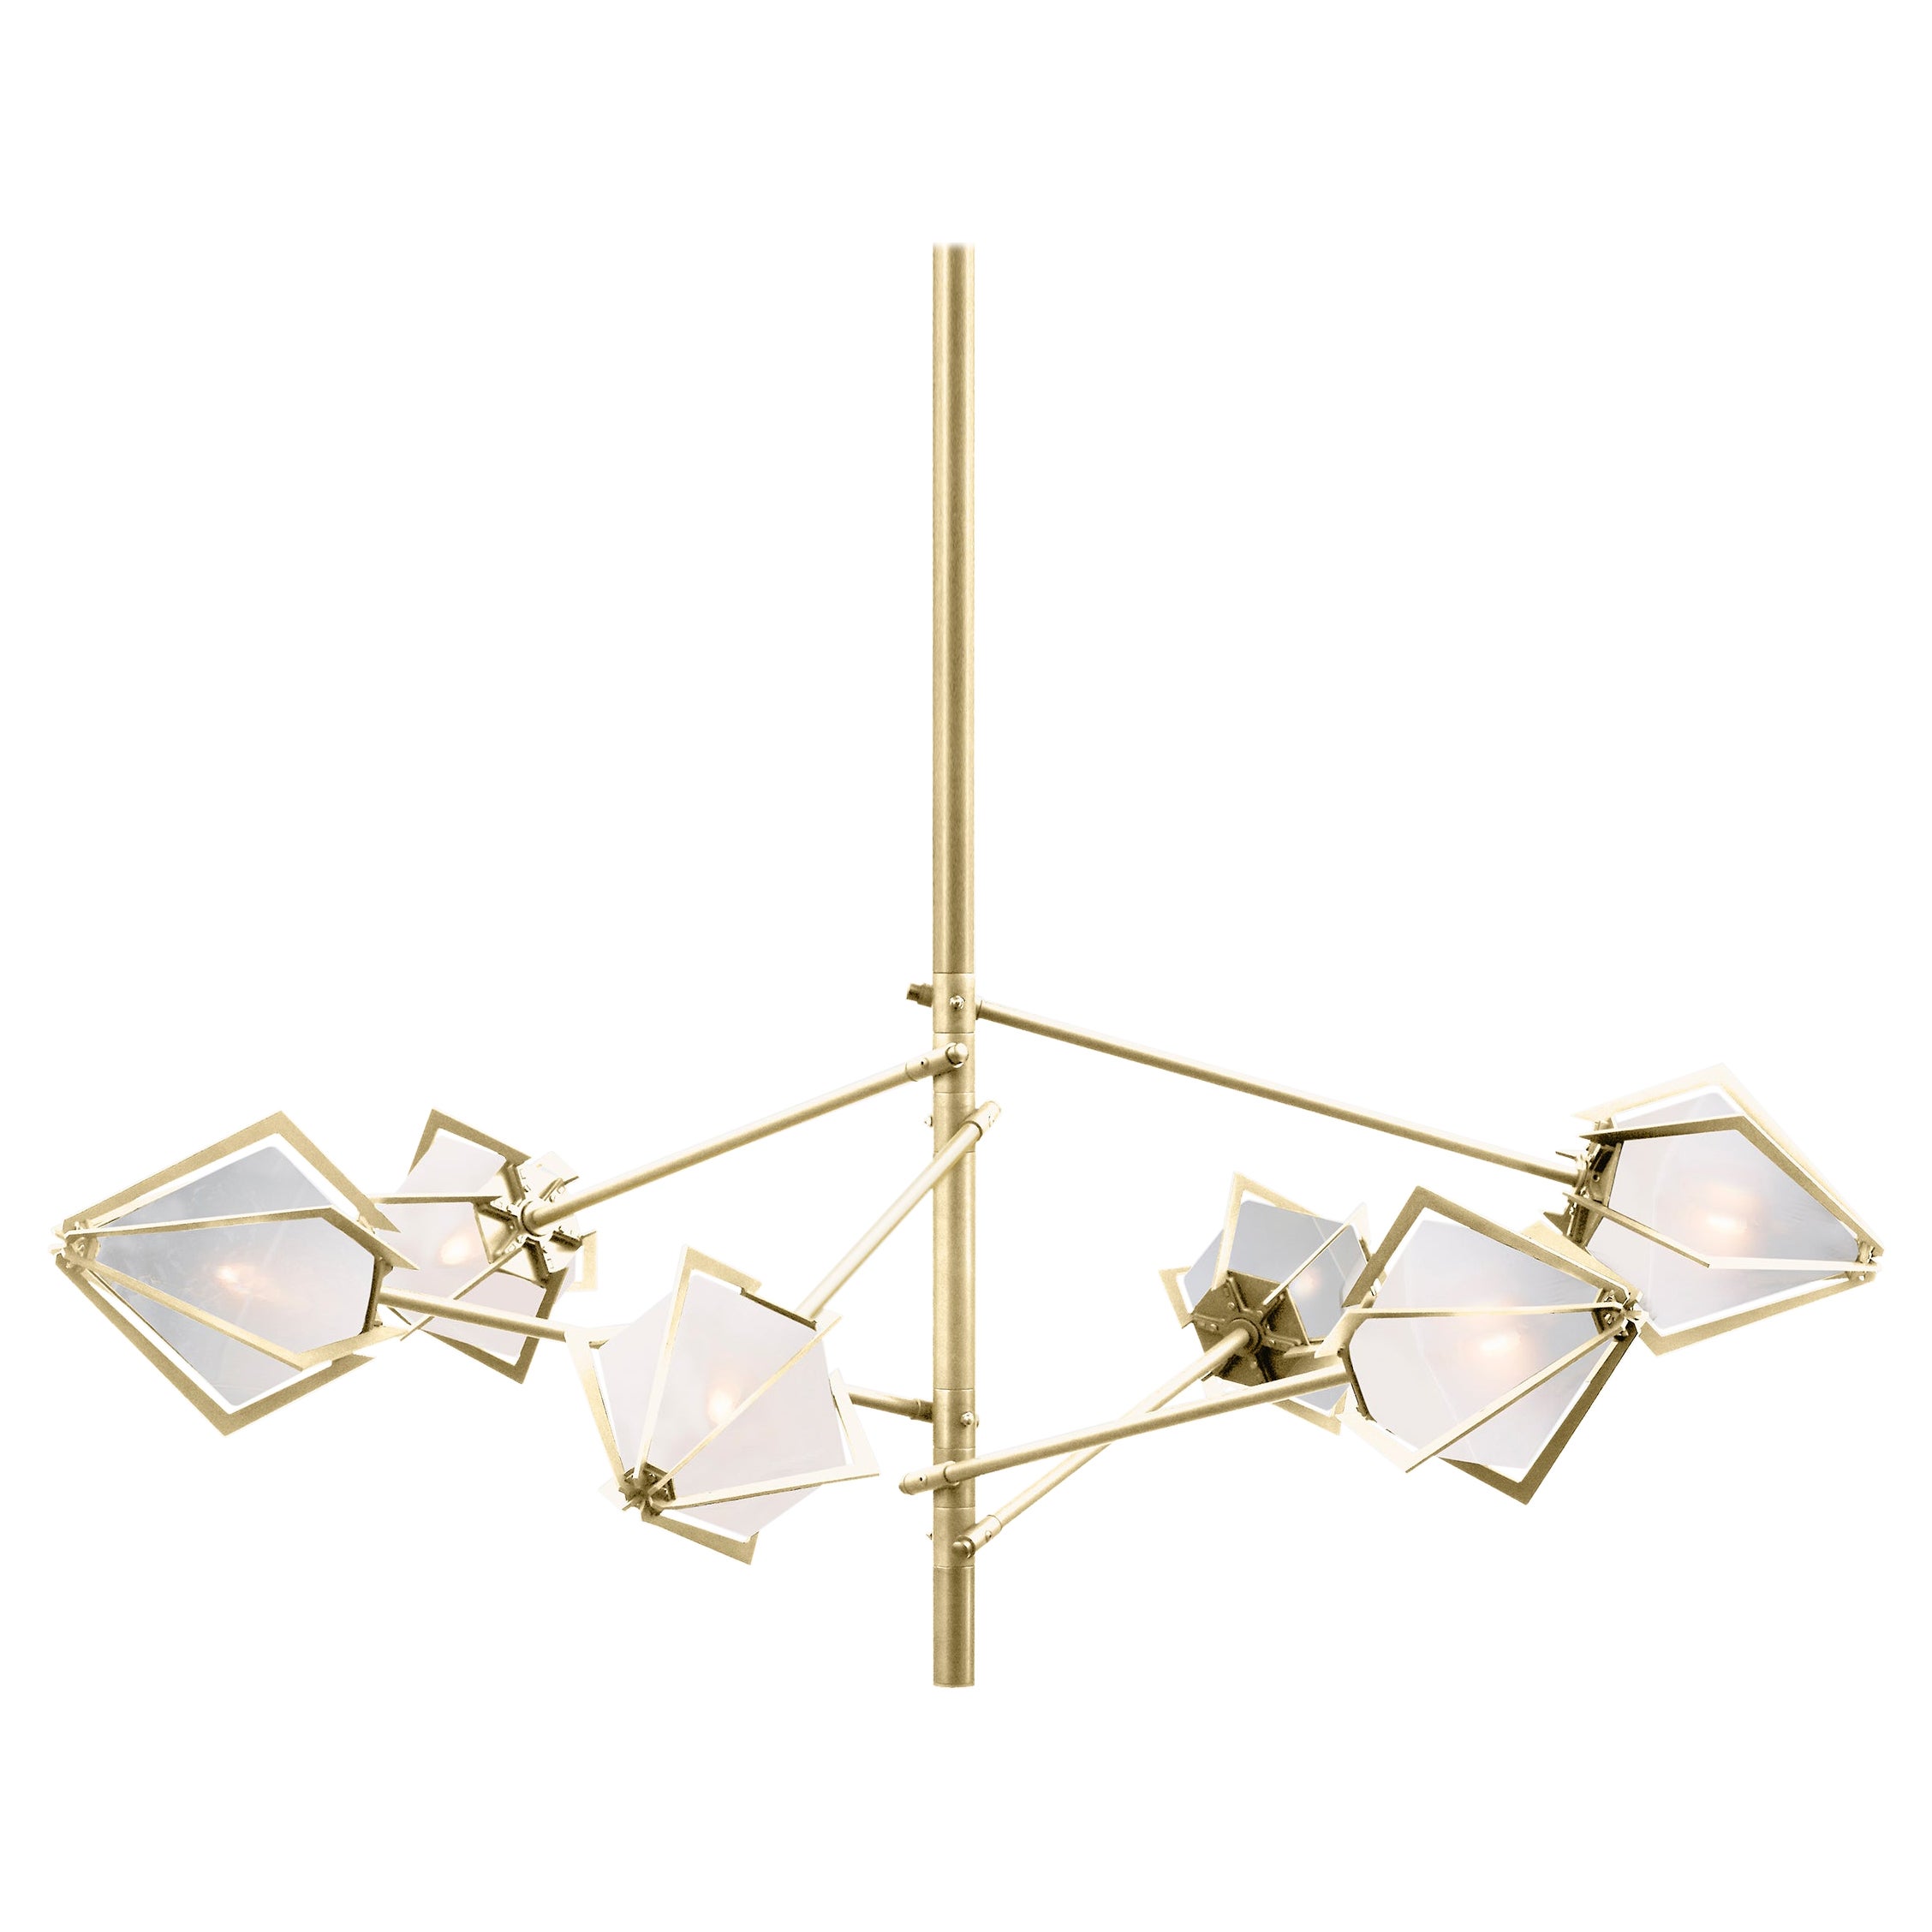 Harlow Spoke Chandelier Small in Satin Brass and Alabaster White Glass For Sale